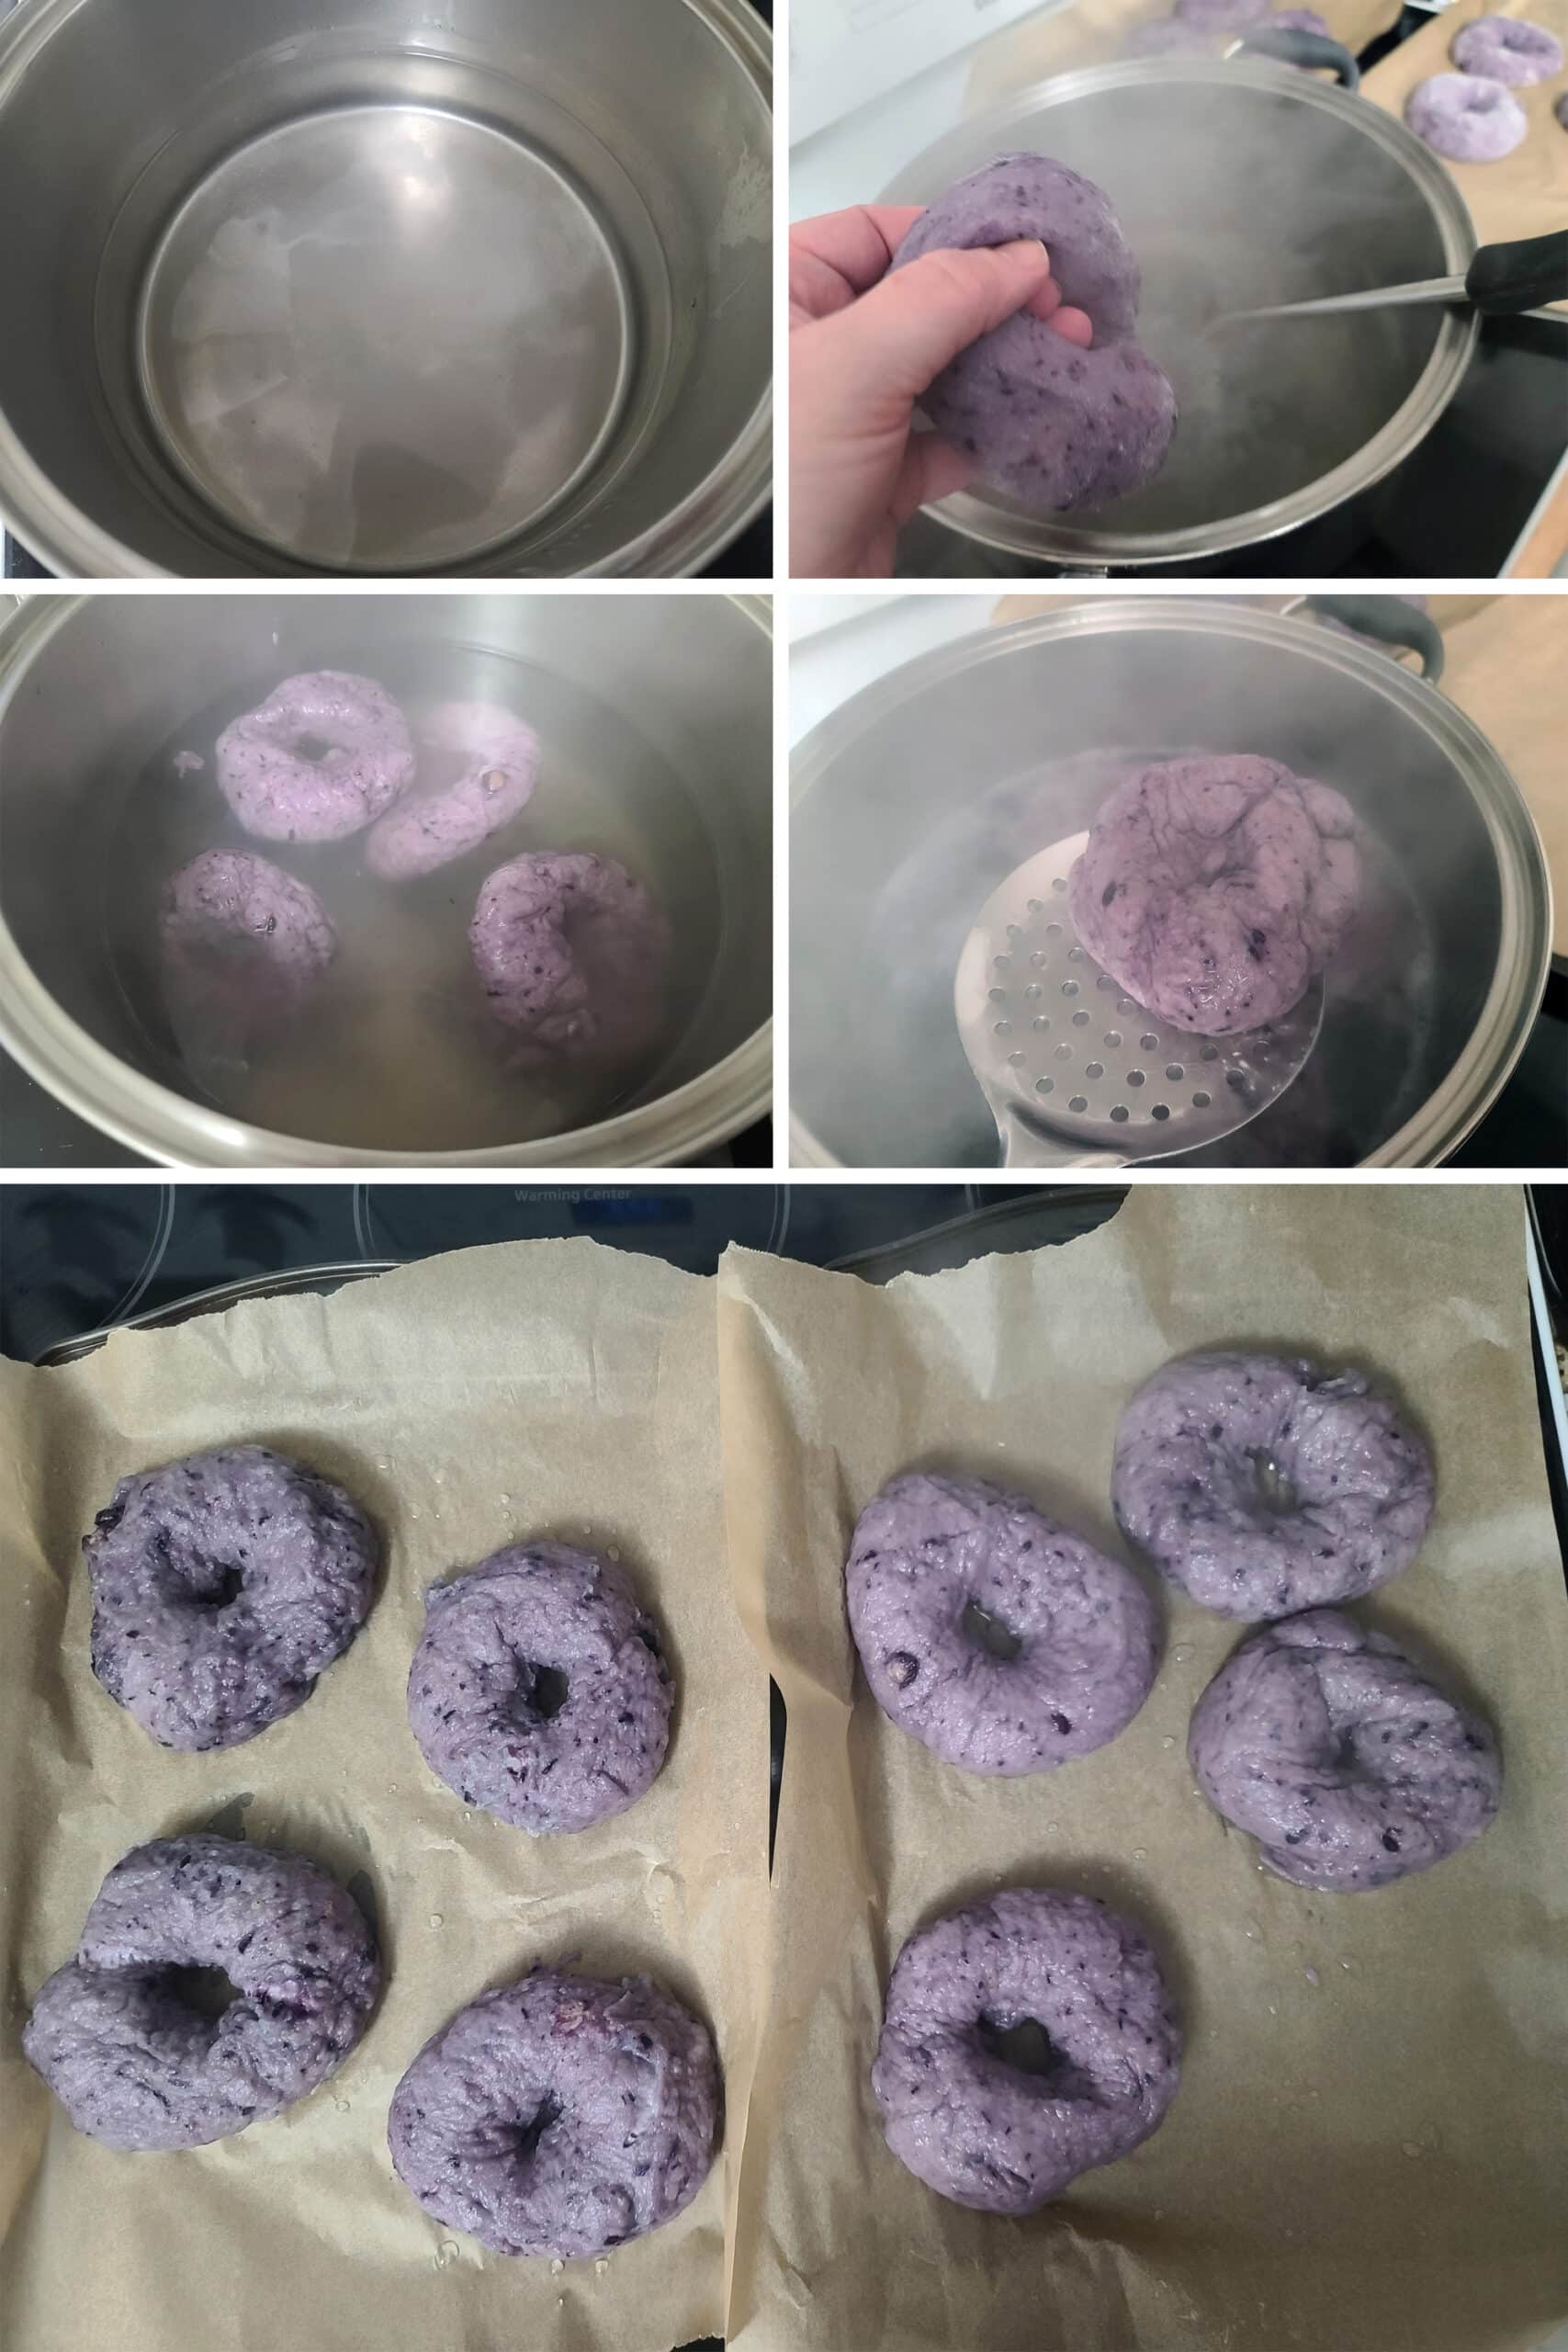 A 5 part image showing a pot of boiling sugar water, a bagel being put into the boiling water, boiled, drained, and set on a pan with 7 other boiled bagels.